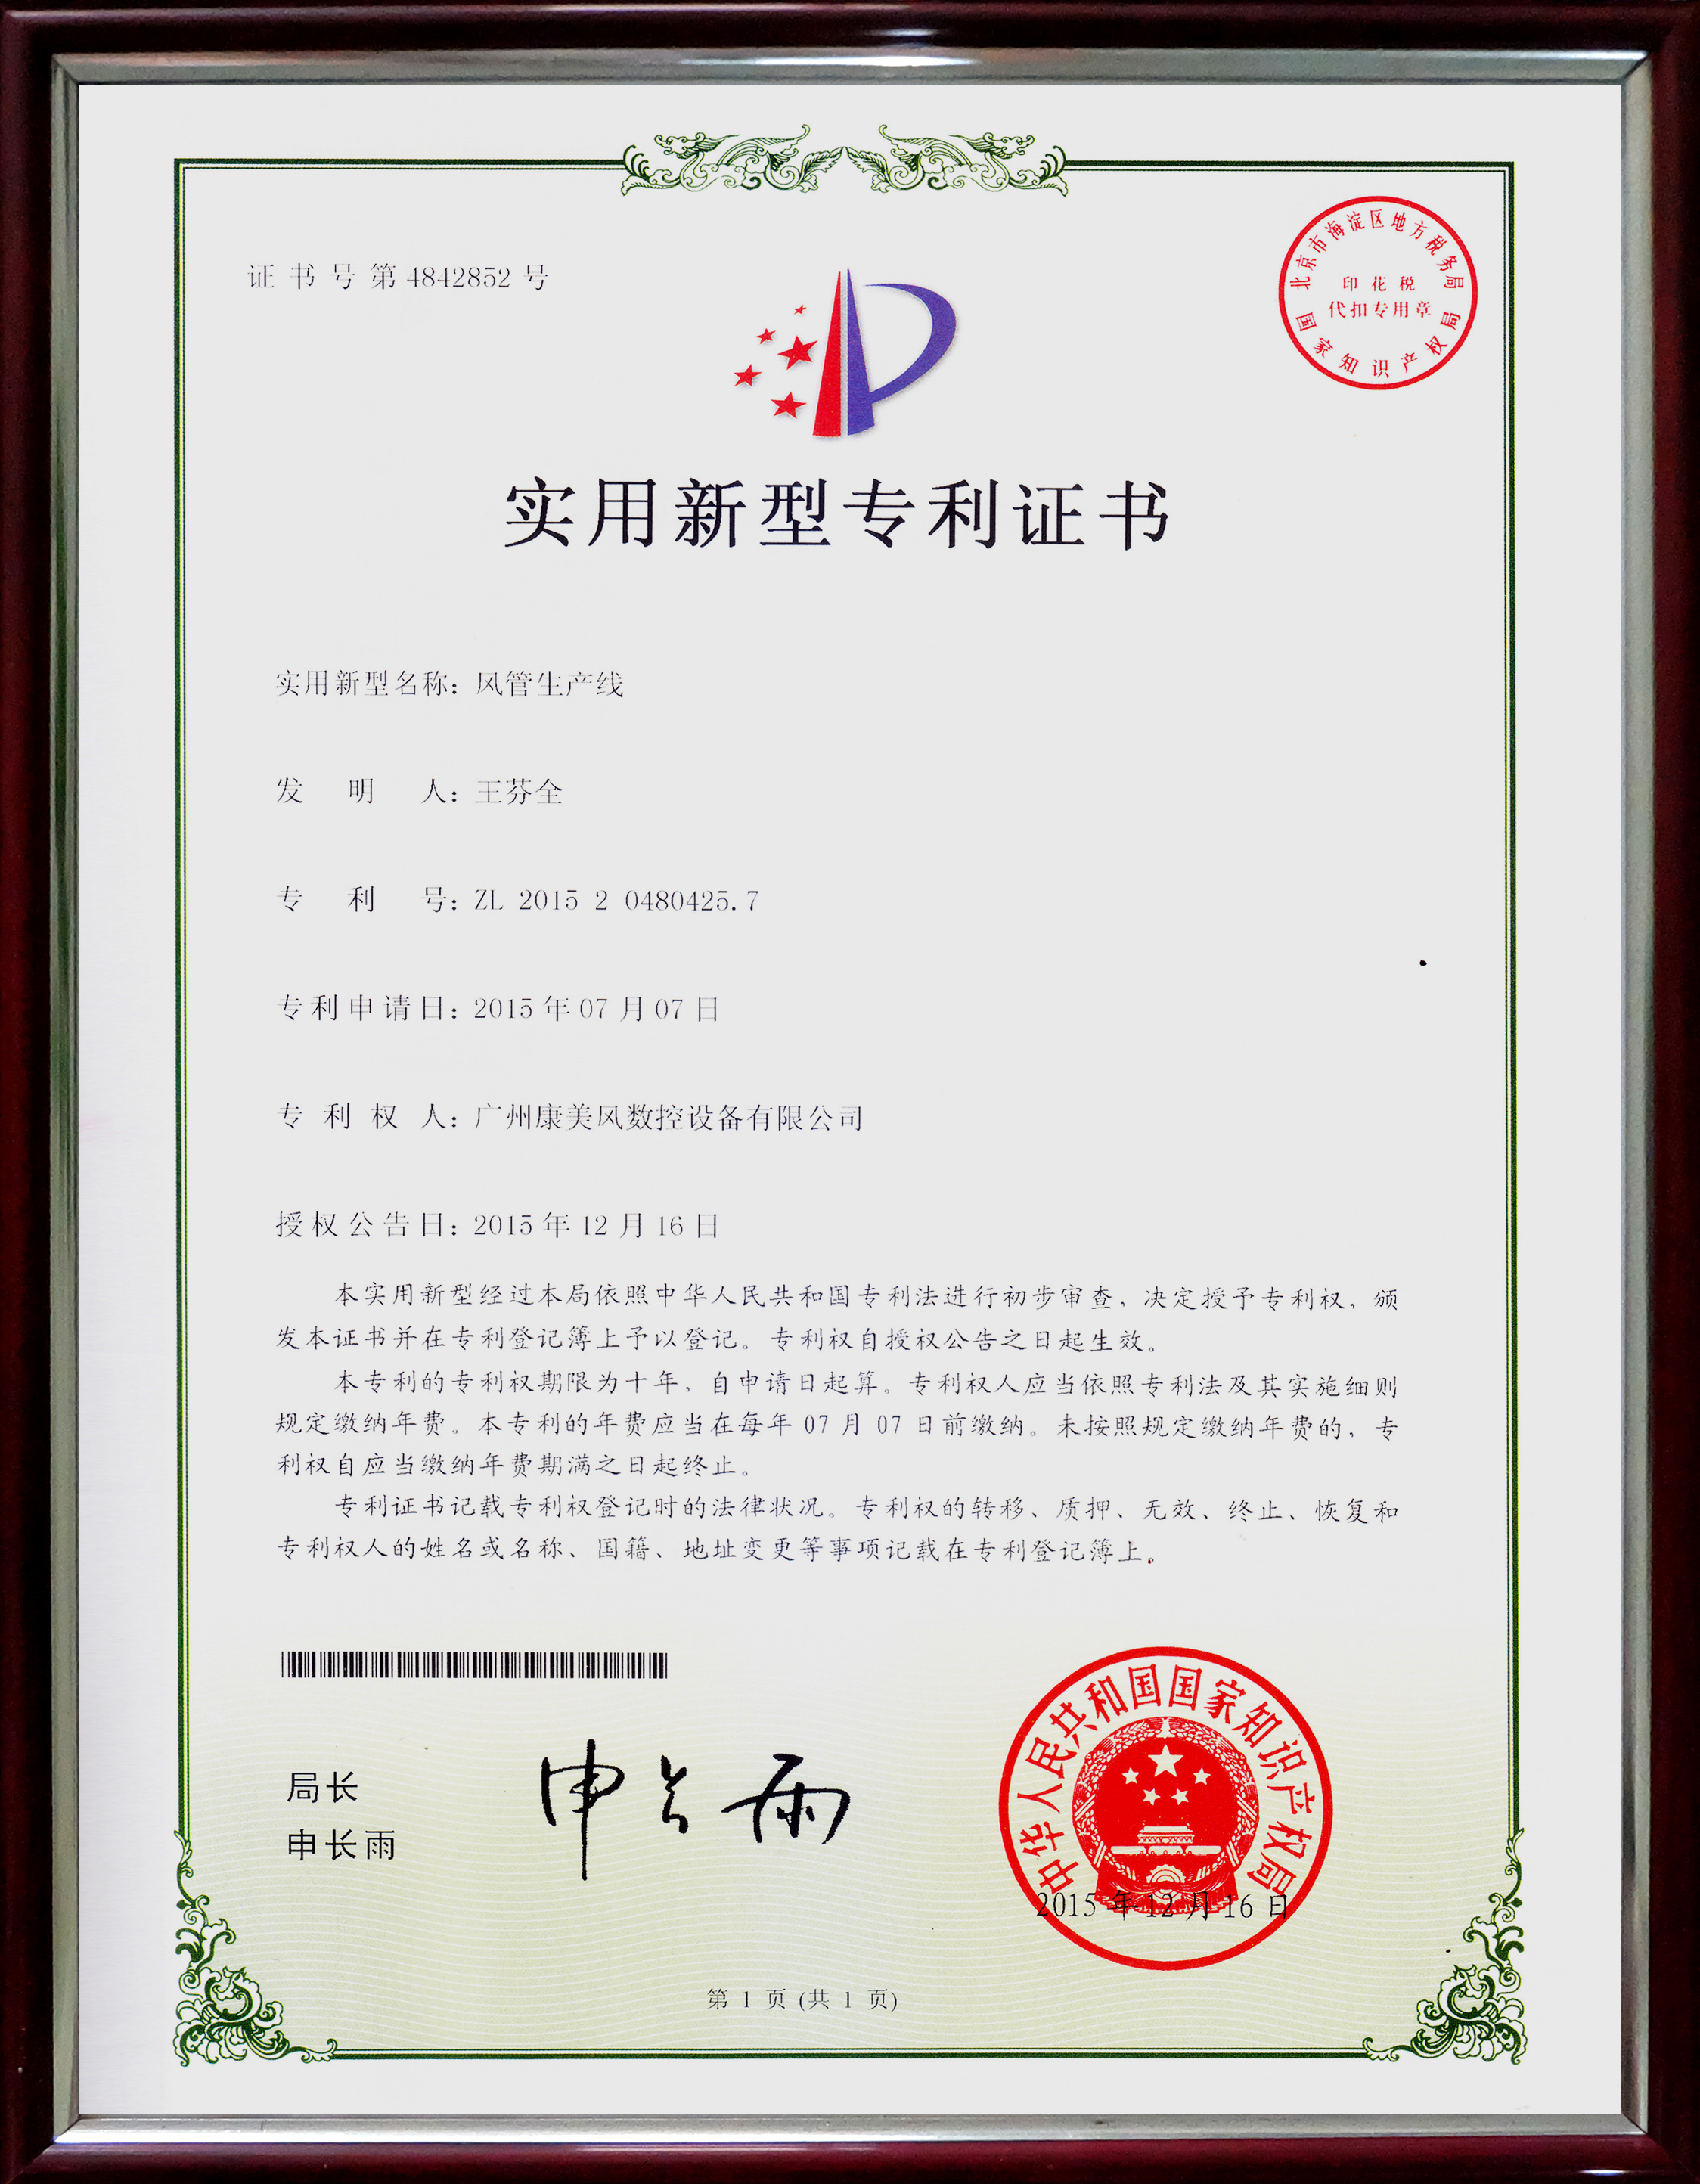 Duct production line patent certificate